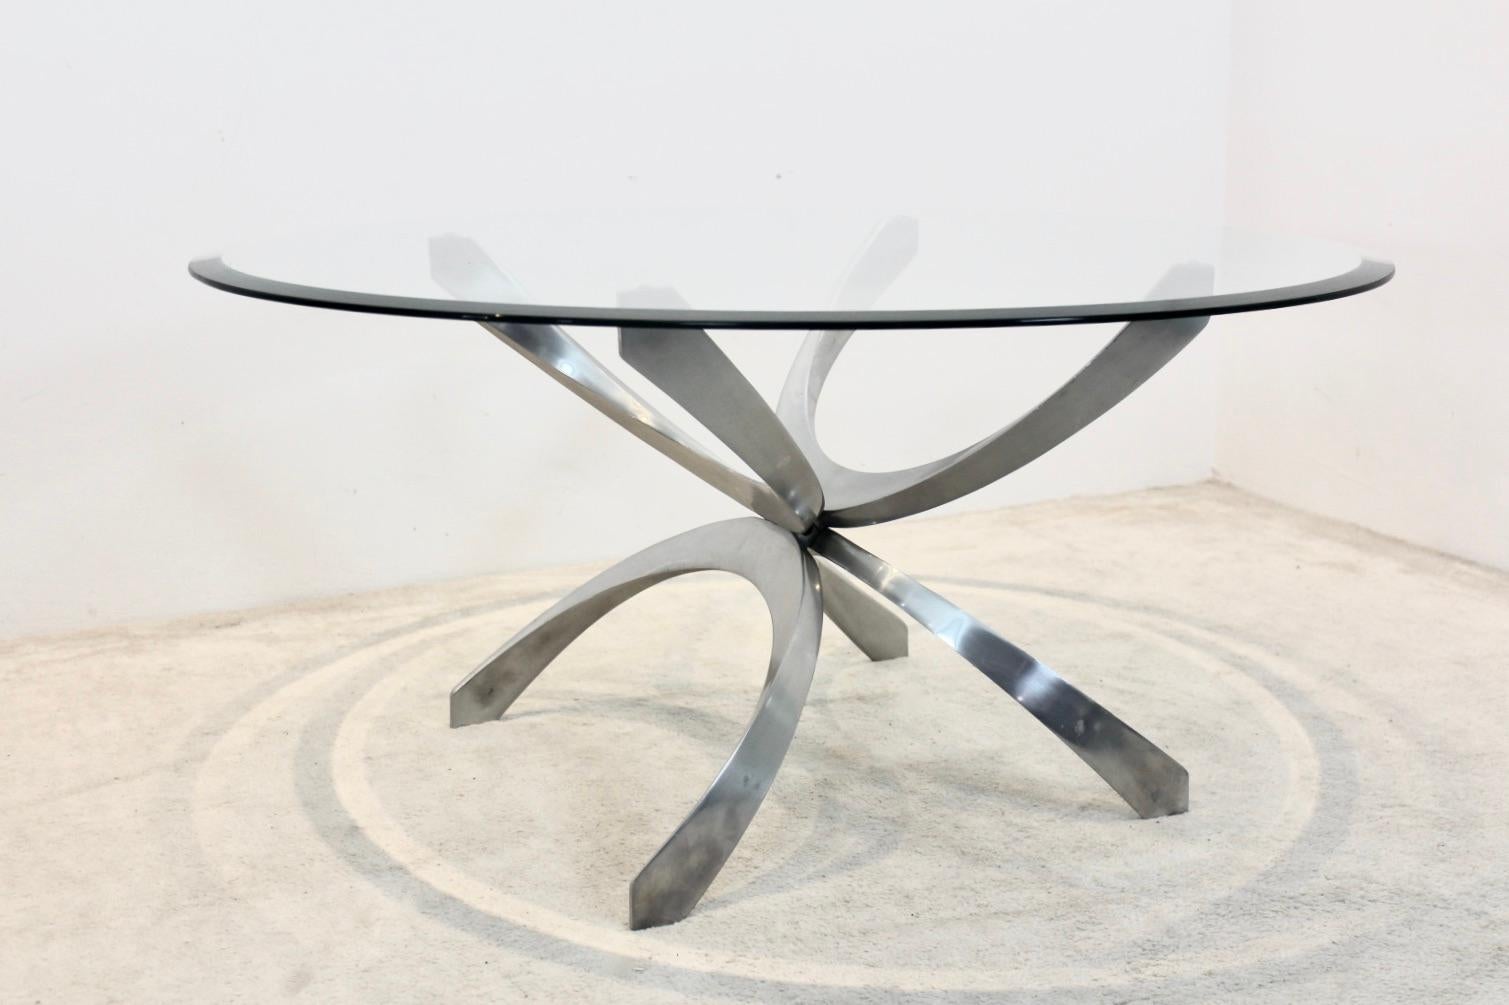 Modernist Sculptural Aluminum and Glass Coffee Table by Knut Hesterberg, 1970s For Sale 1